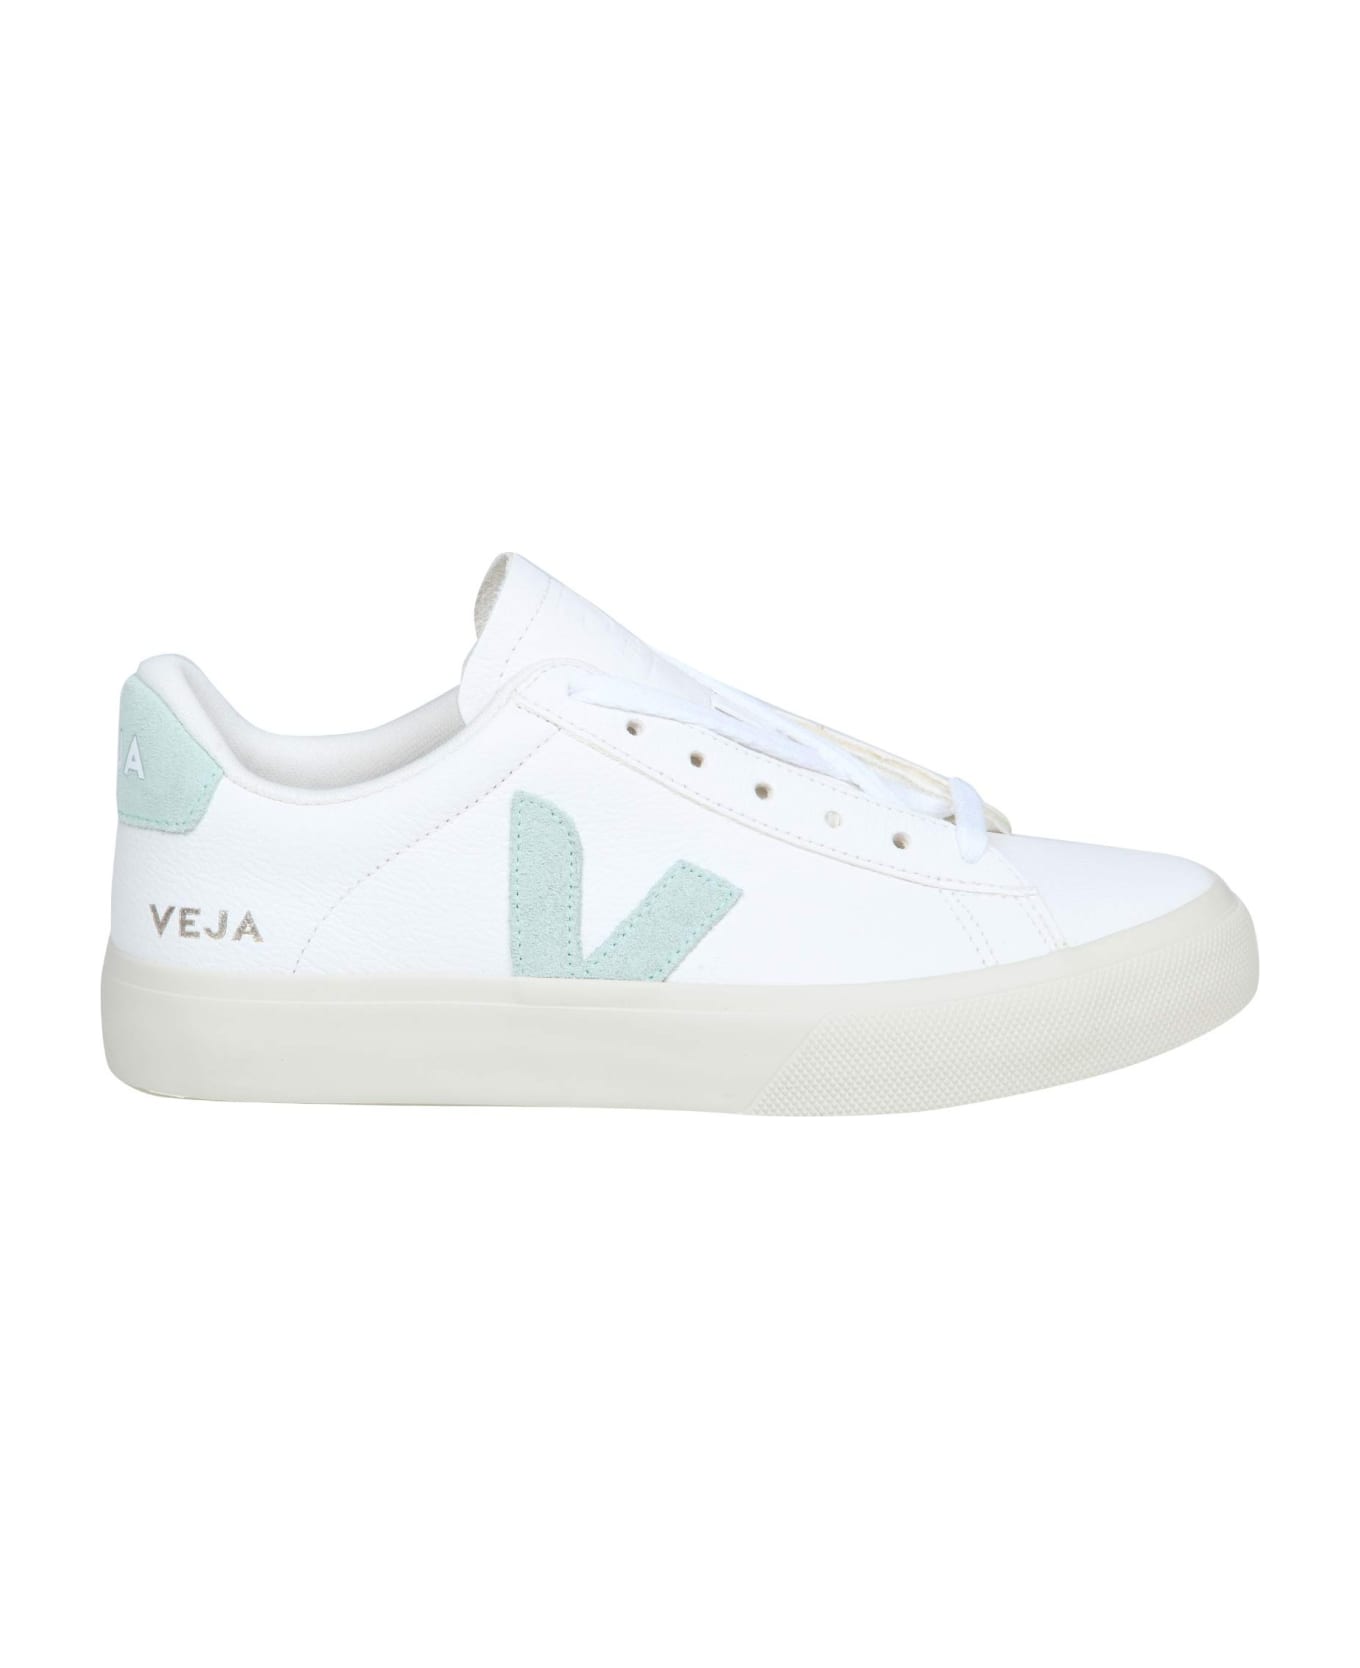 Veja Campo Chromefree In White/green Leather - White/matcha 